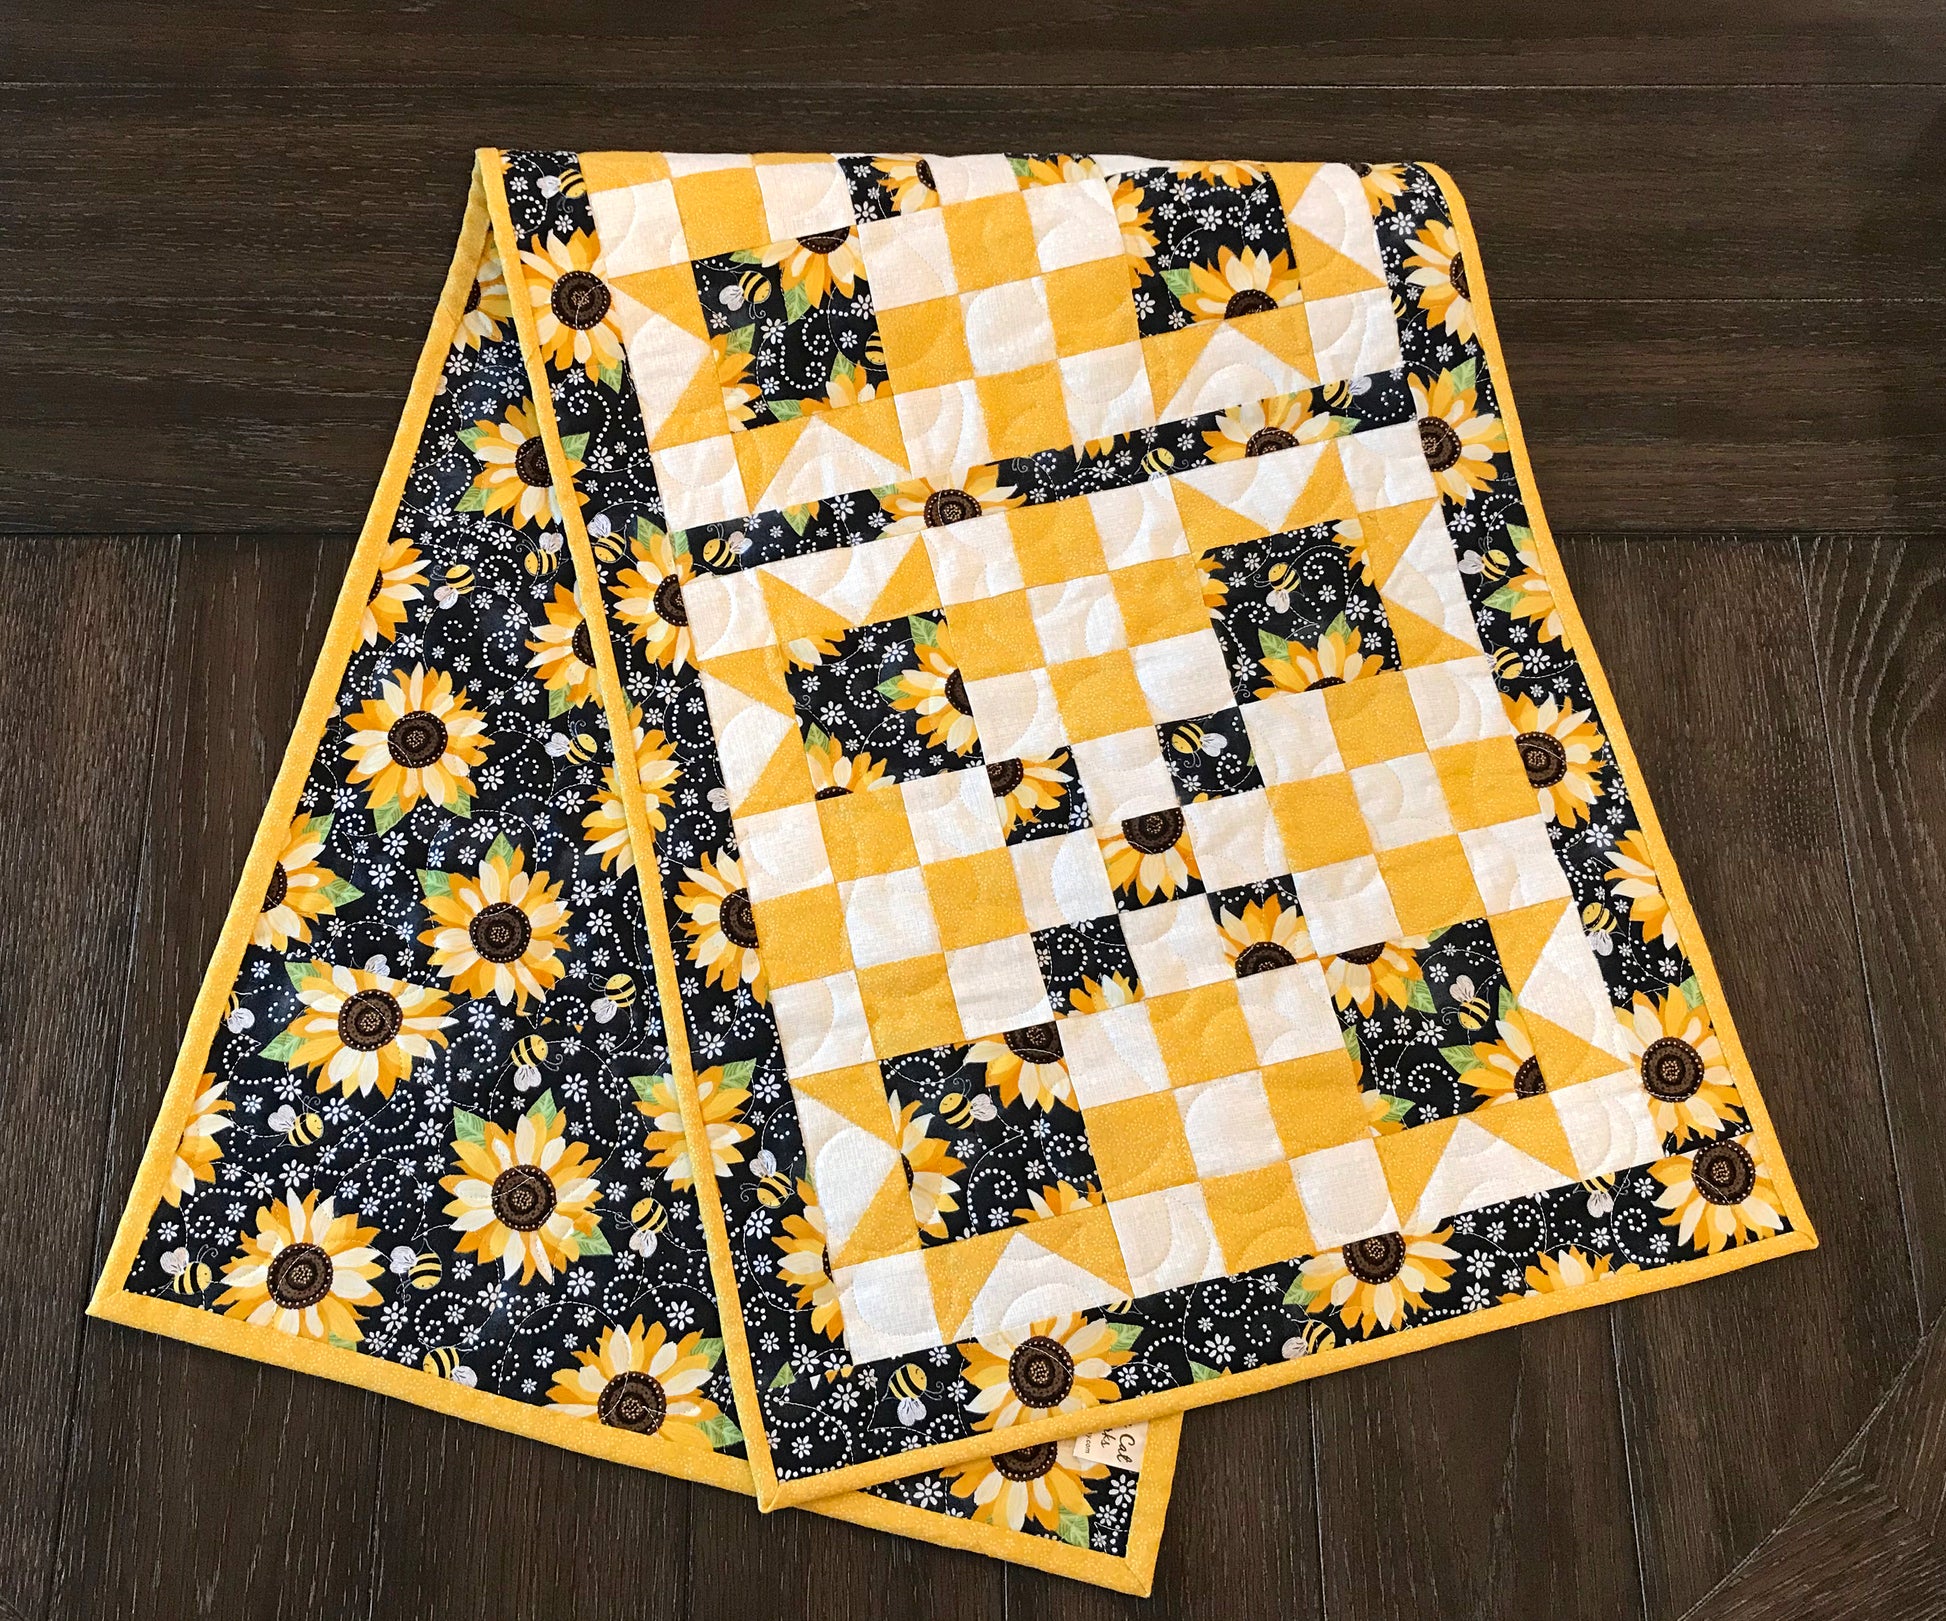 folded table runner on a table for pattern for a table runner or table topper that has sawtooth star corner units with nine patch blocks in between.